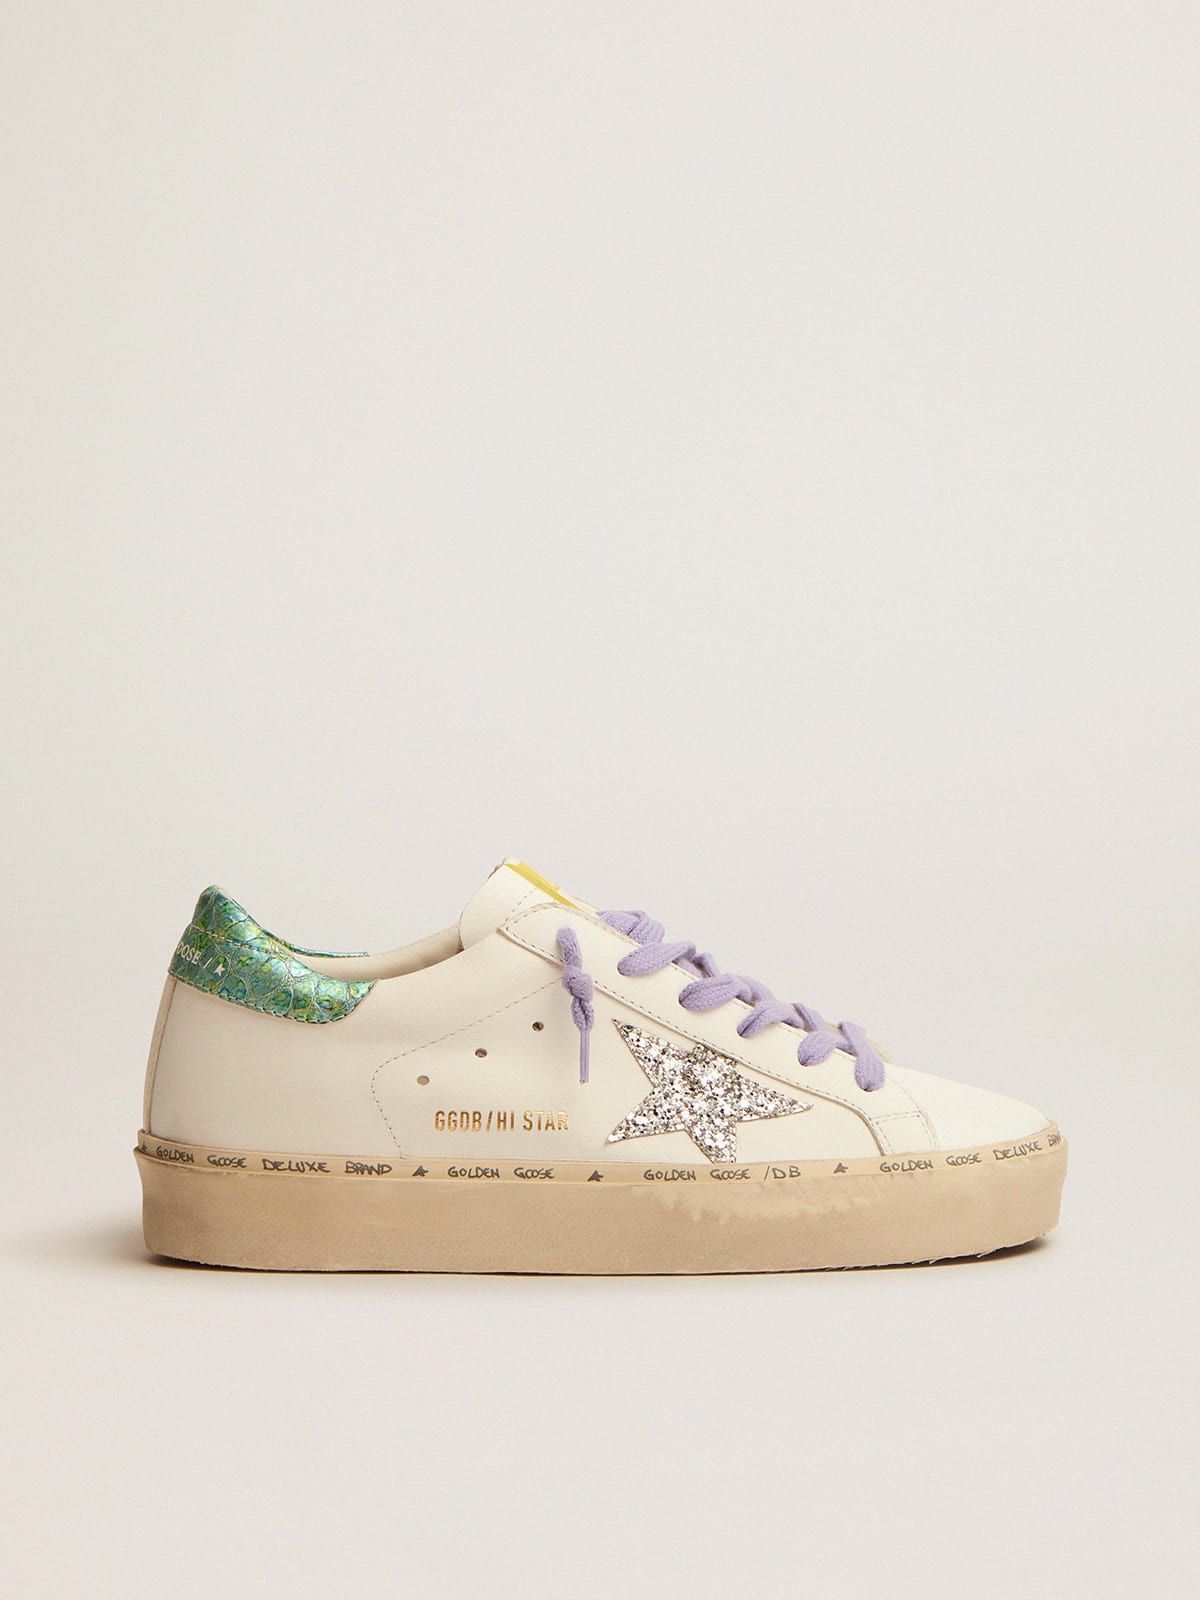 Hi Star LTD sneakers with glitter star and printed heel tab | Golden Goose